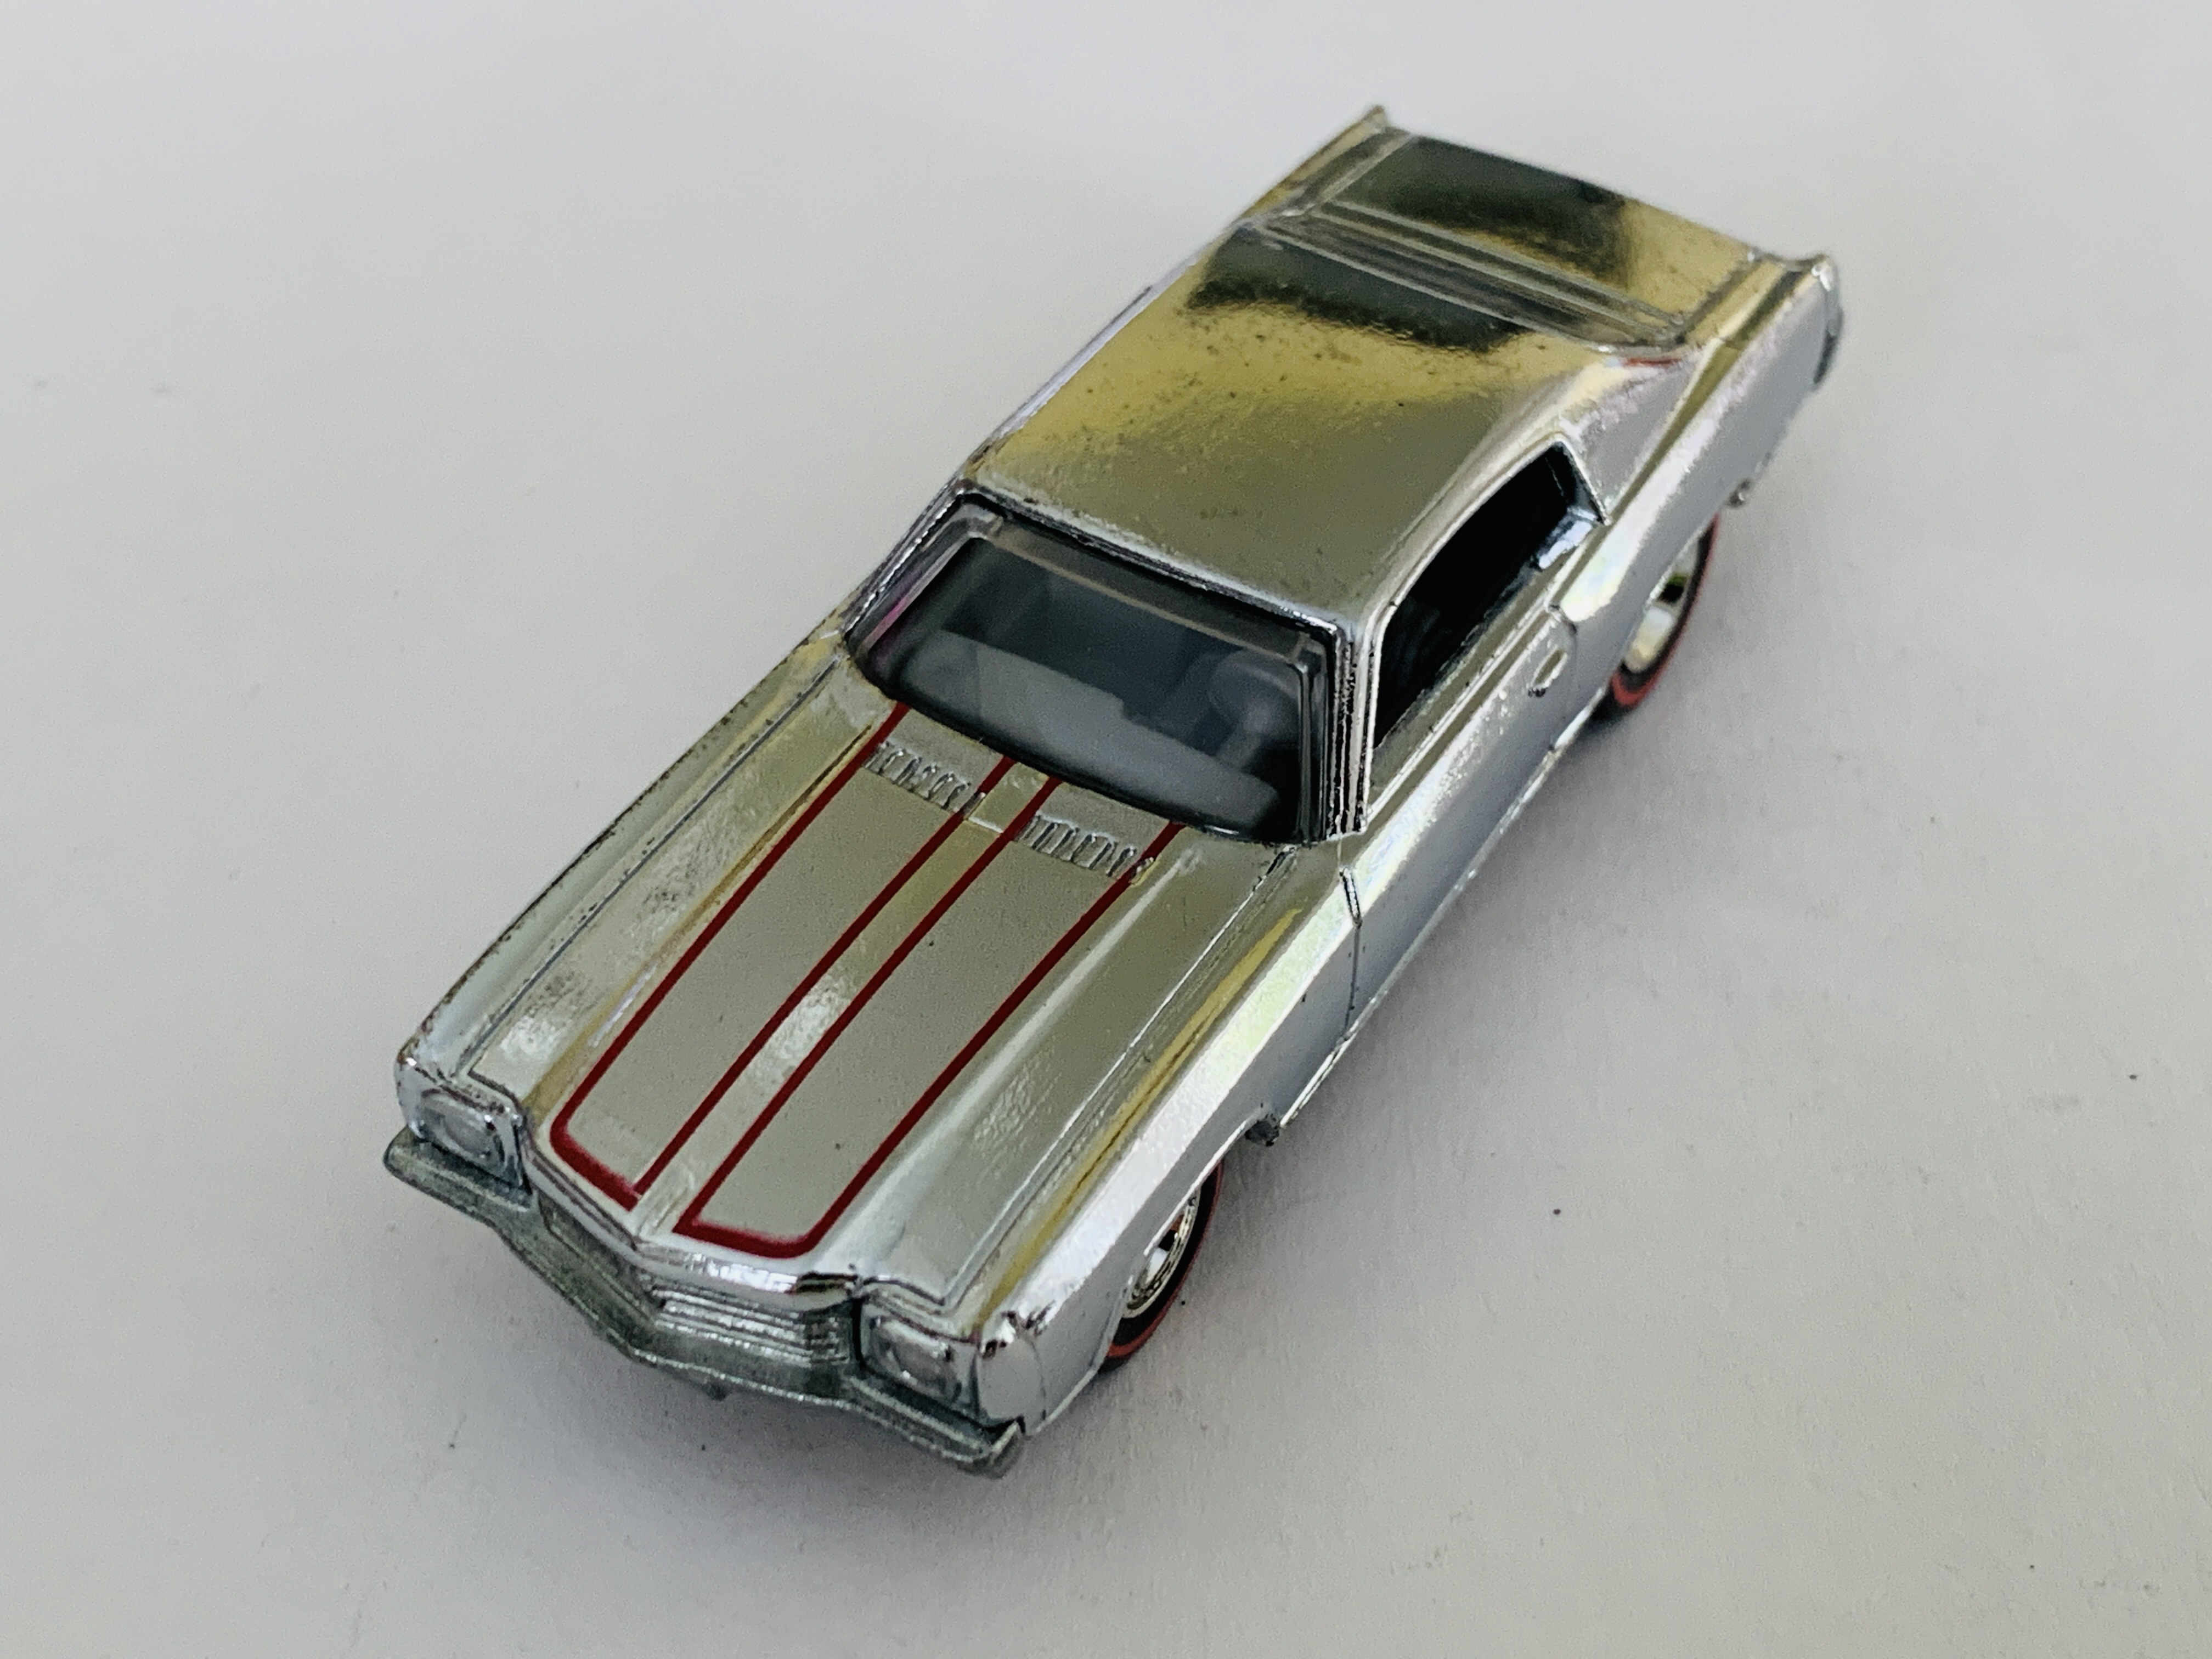 Hot Wheels Classics Series 5 Chase '70 Monte Carlo